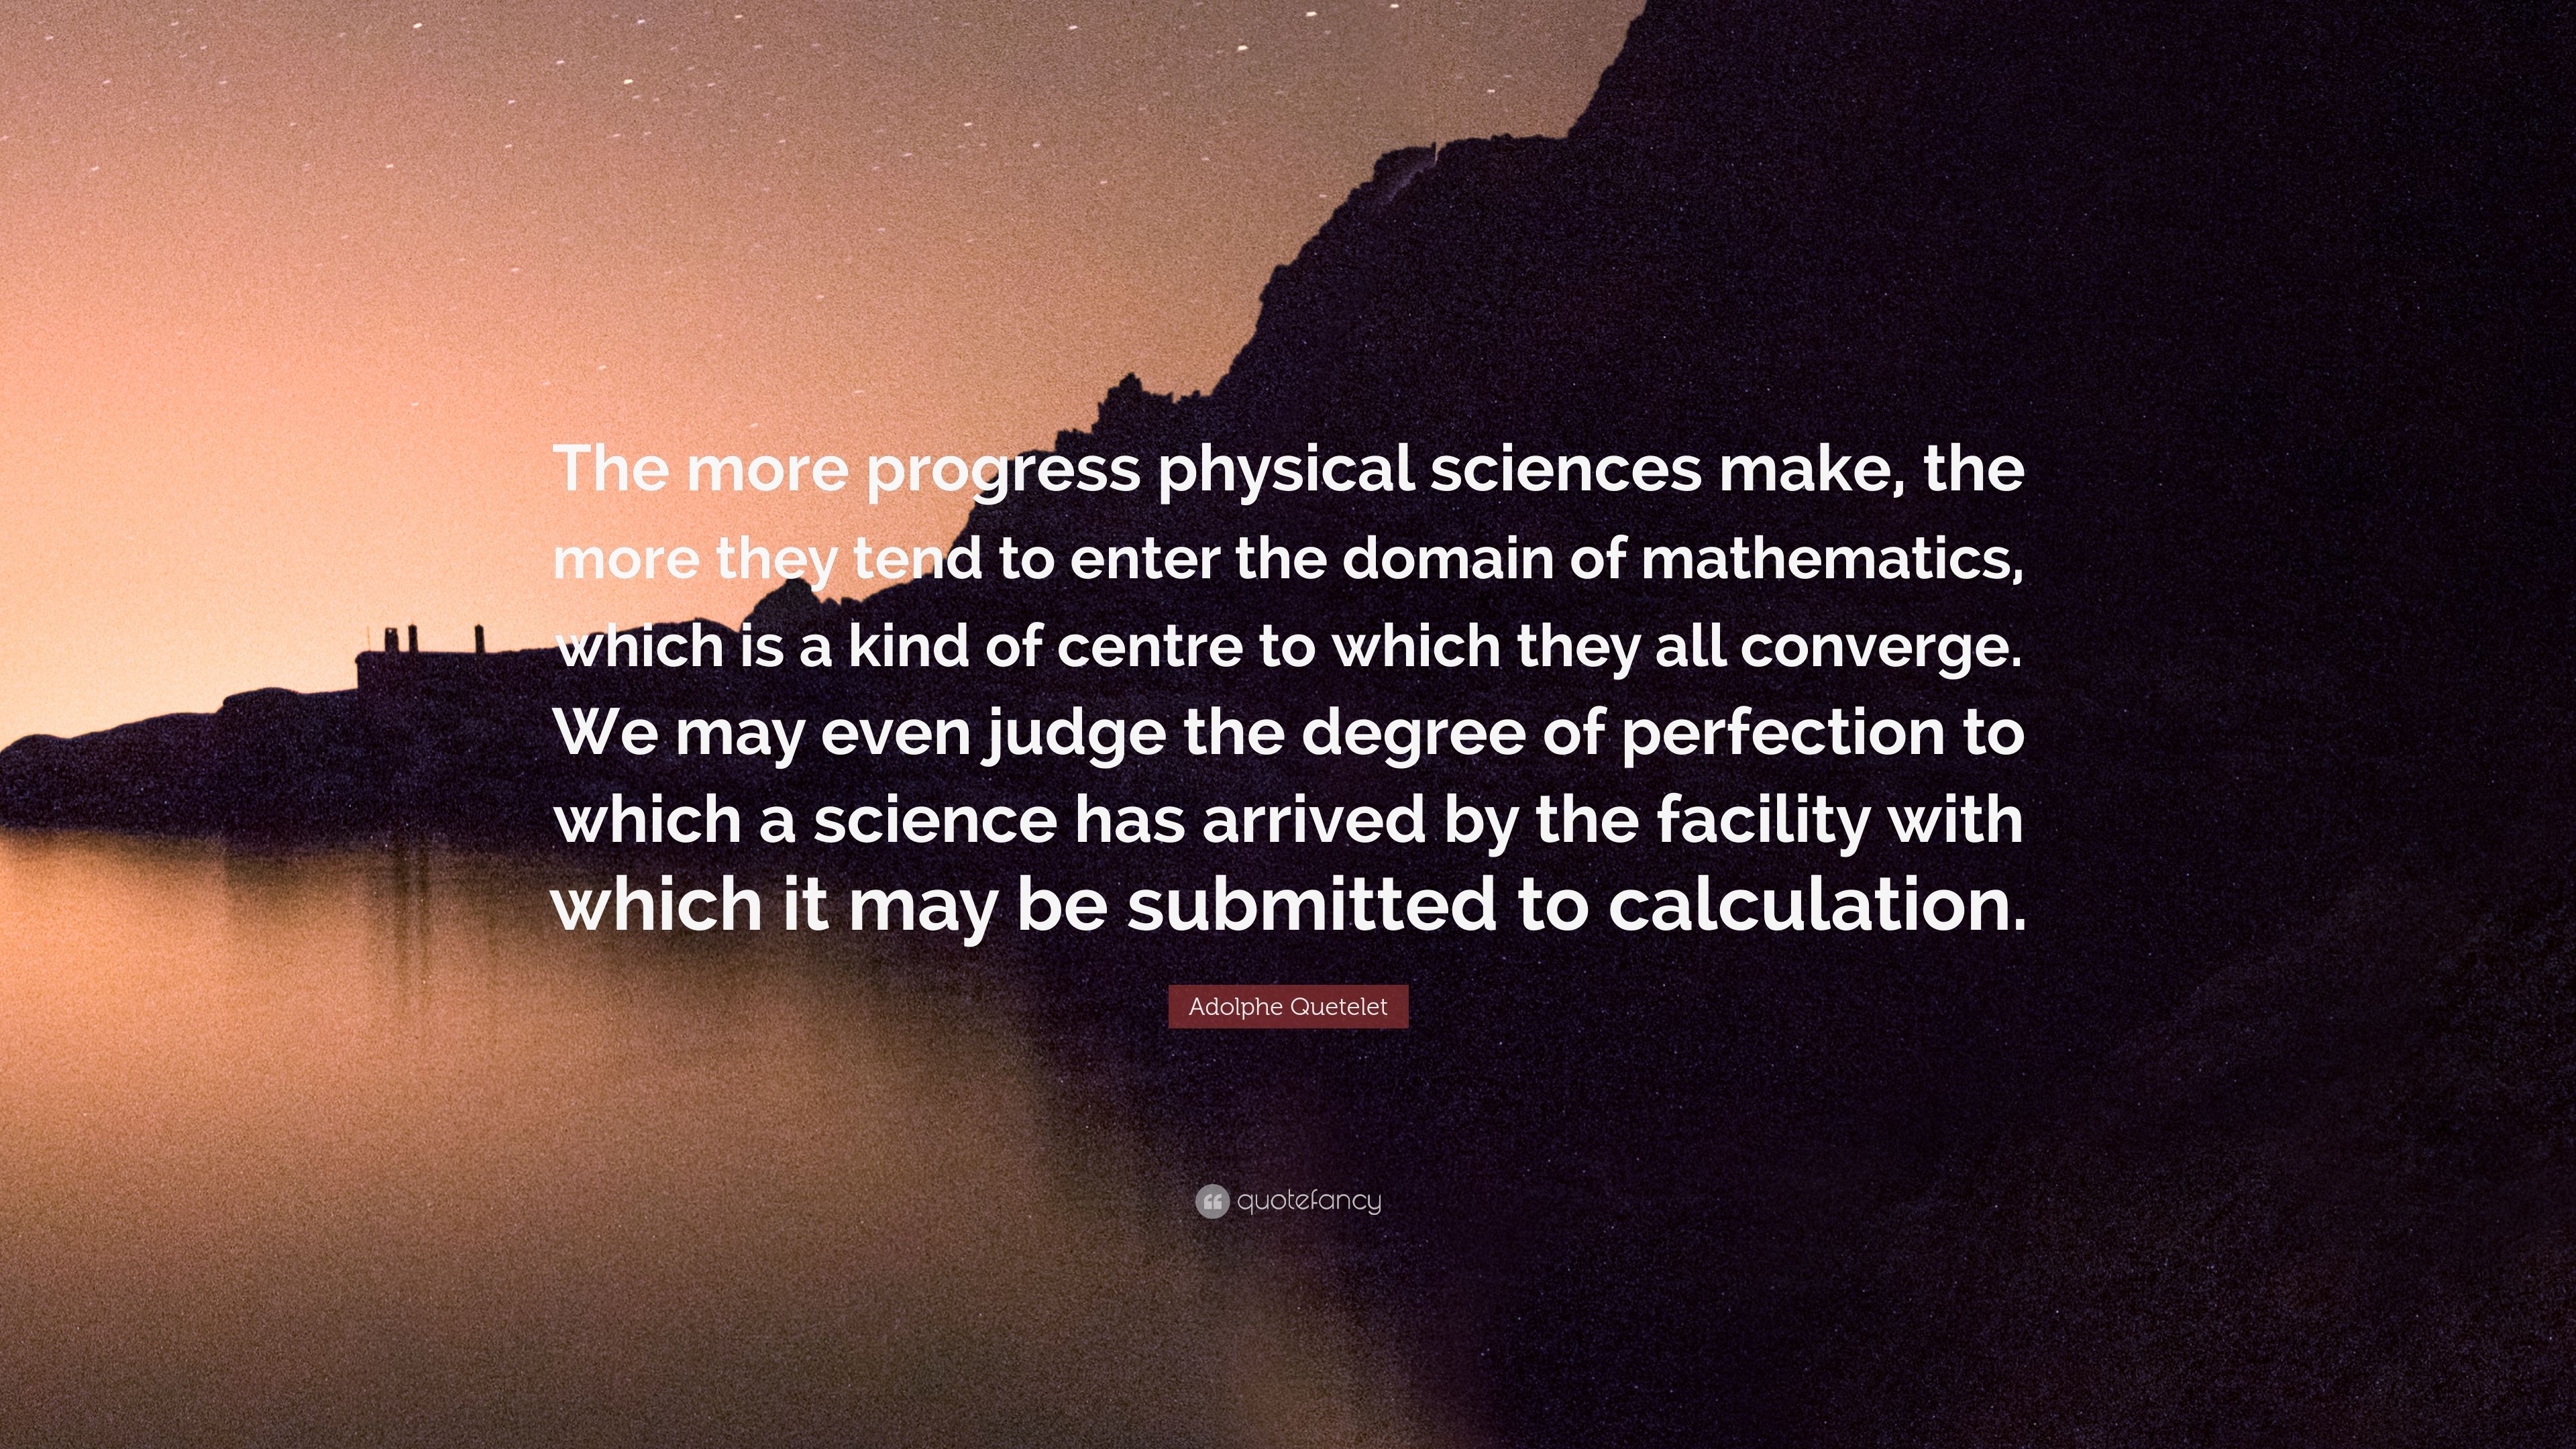 Adolphe Quetelet Quote: “The more progress physical sciences make